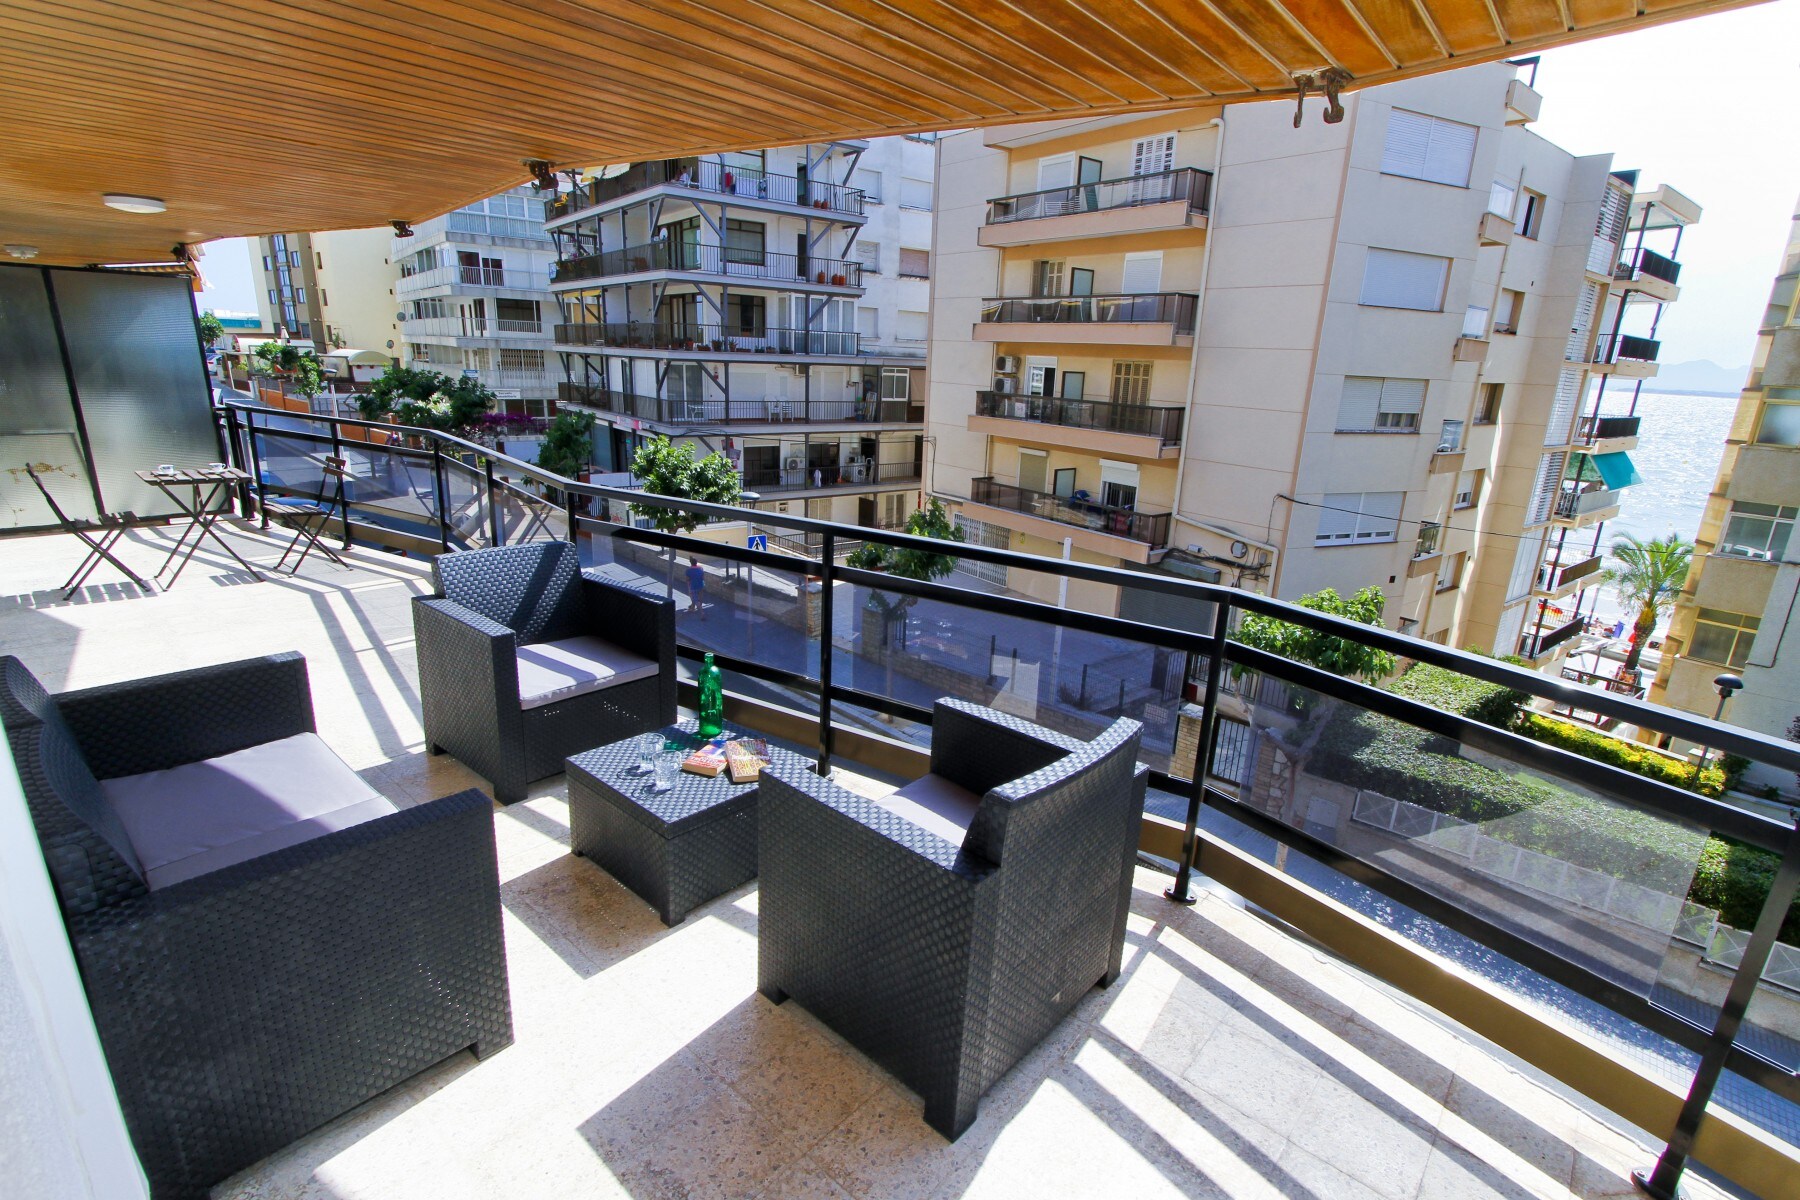 Property Image 2 - Sensational apartment located 50m from the beach in Salou